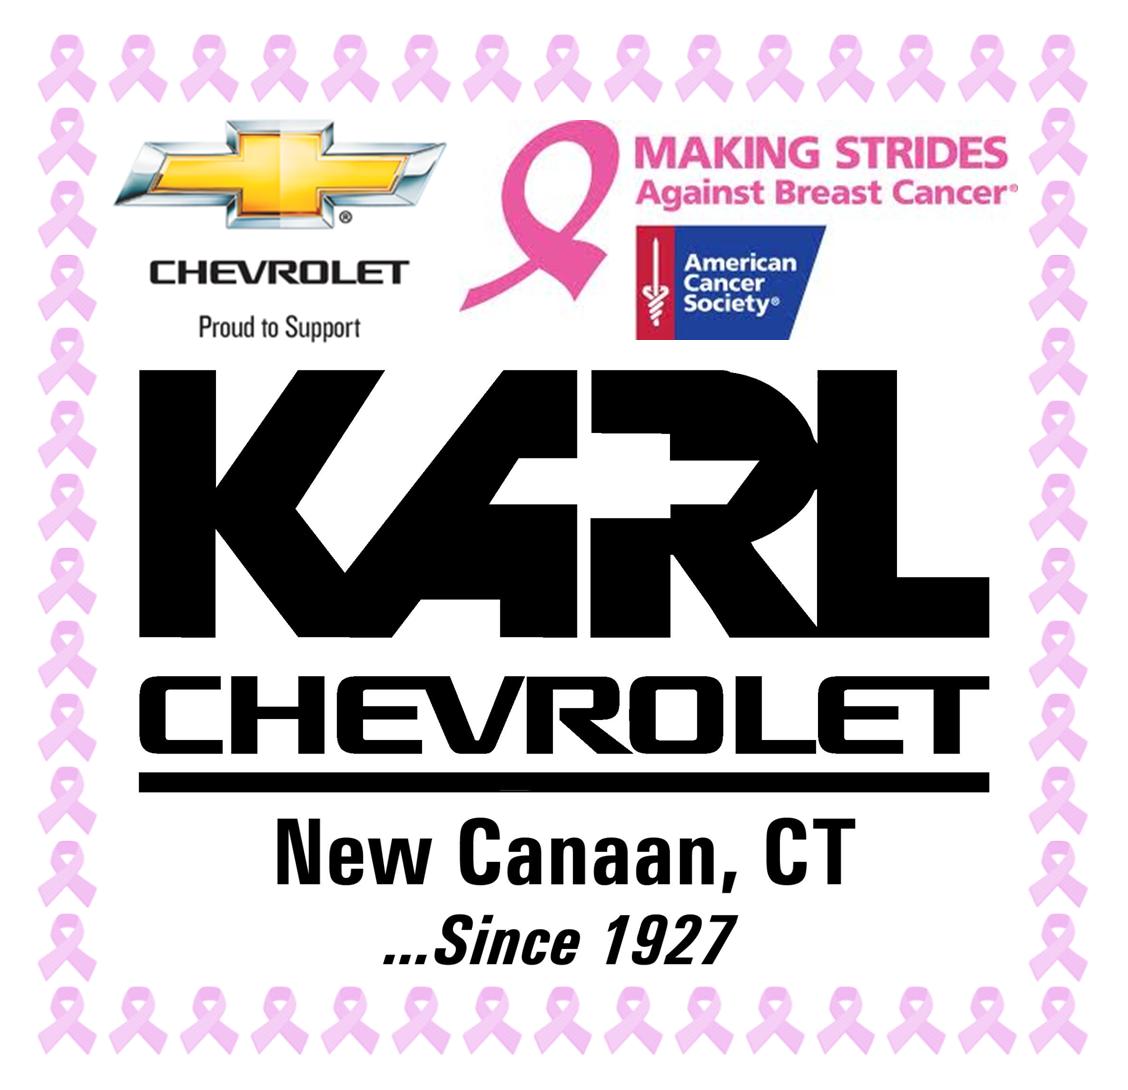 KARL Chevrolet Supports Making Strides Against Breast Cancer with ‘Test Drive for a Cure’